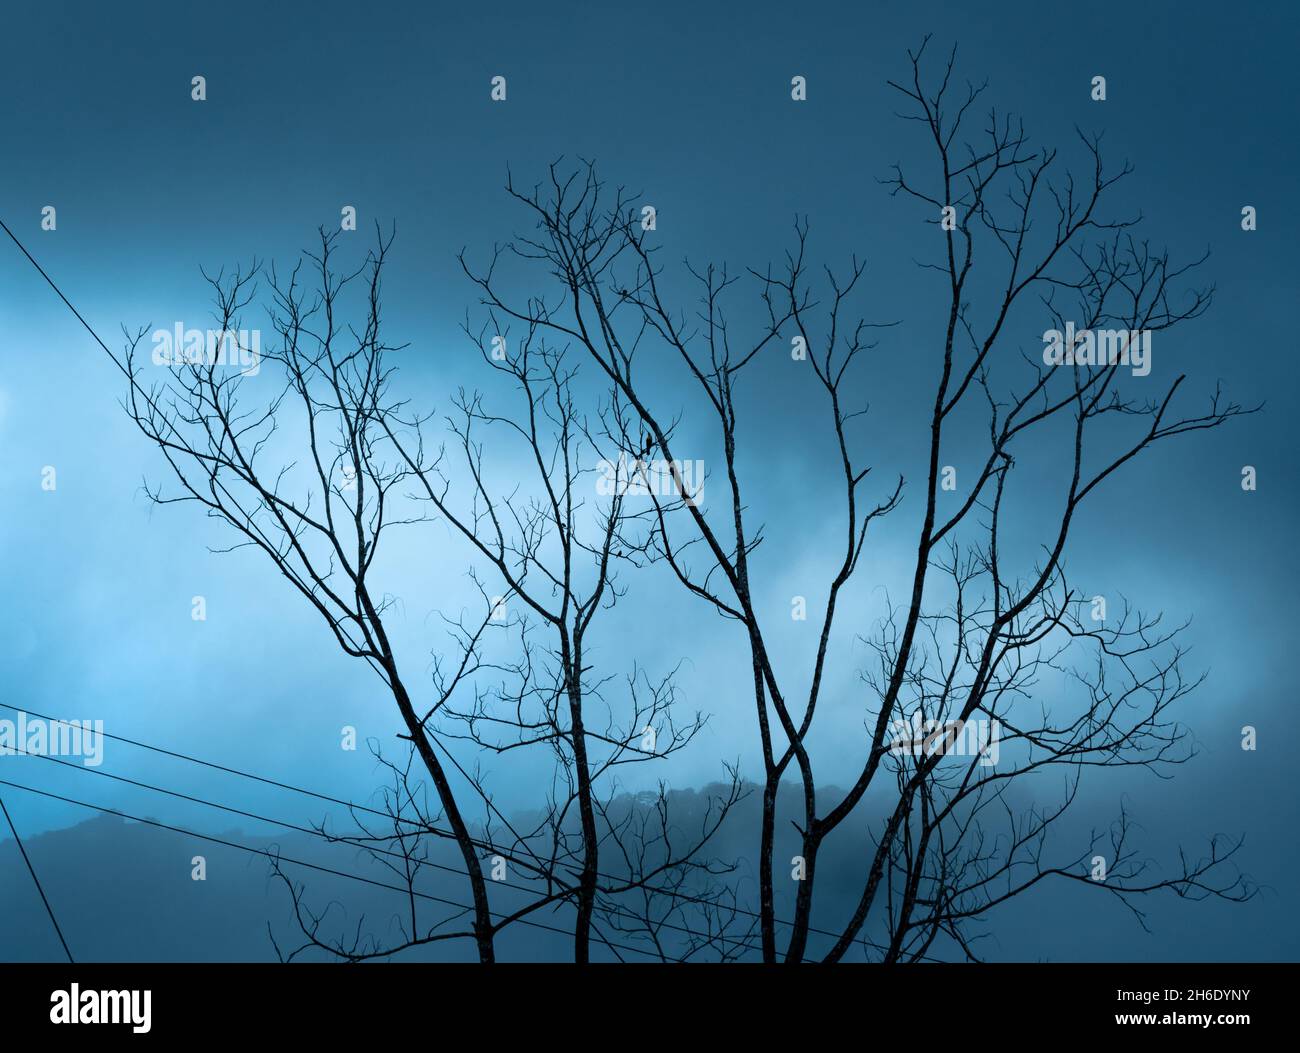 Landscape of a simplistic dead tree shrouded in mist at twilight. Stock Photo